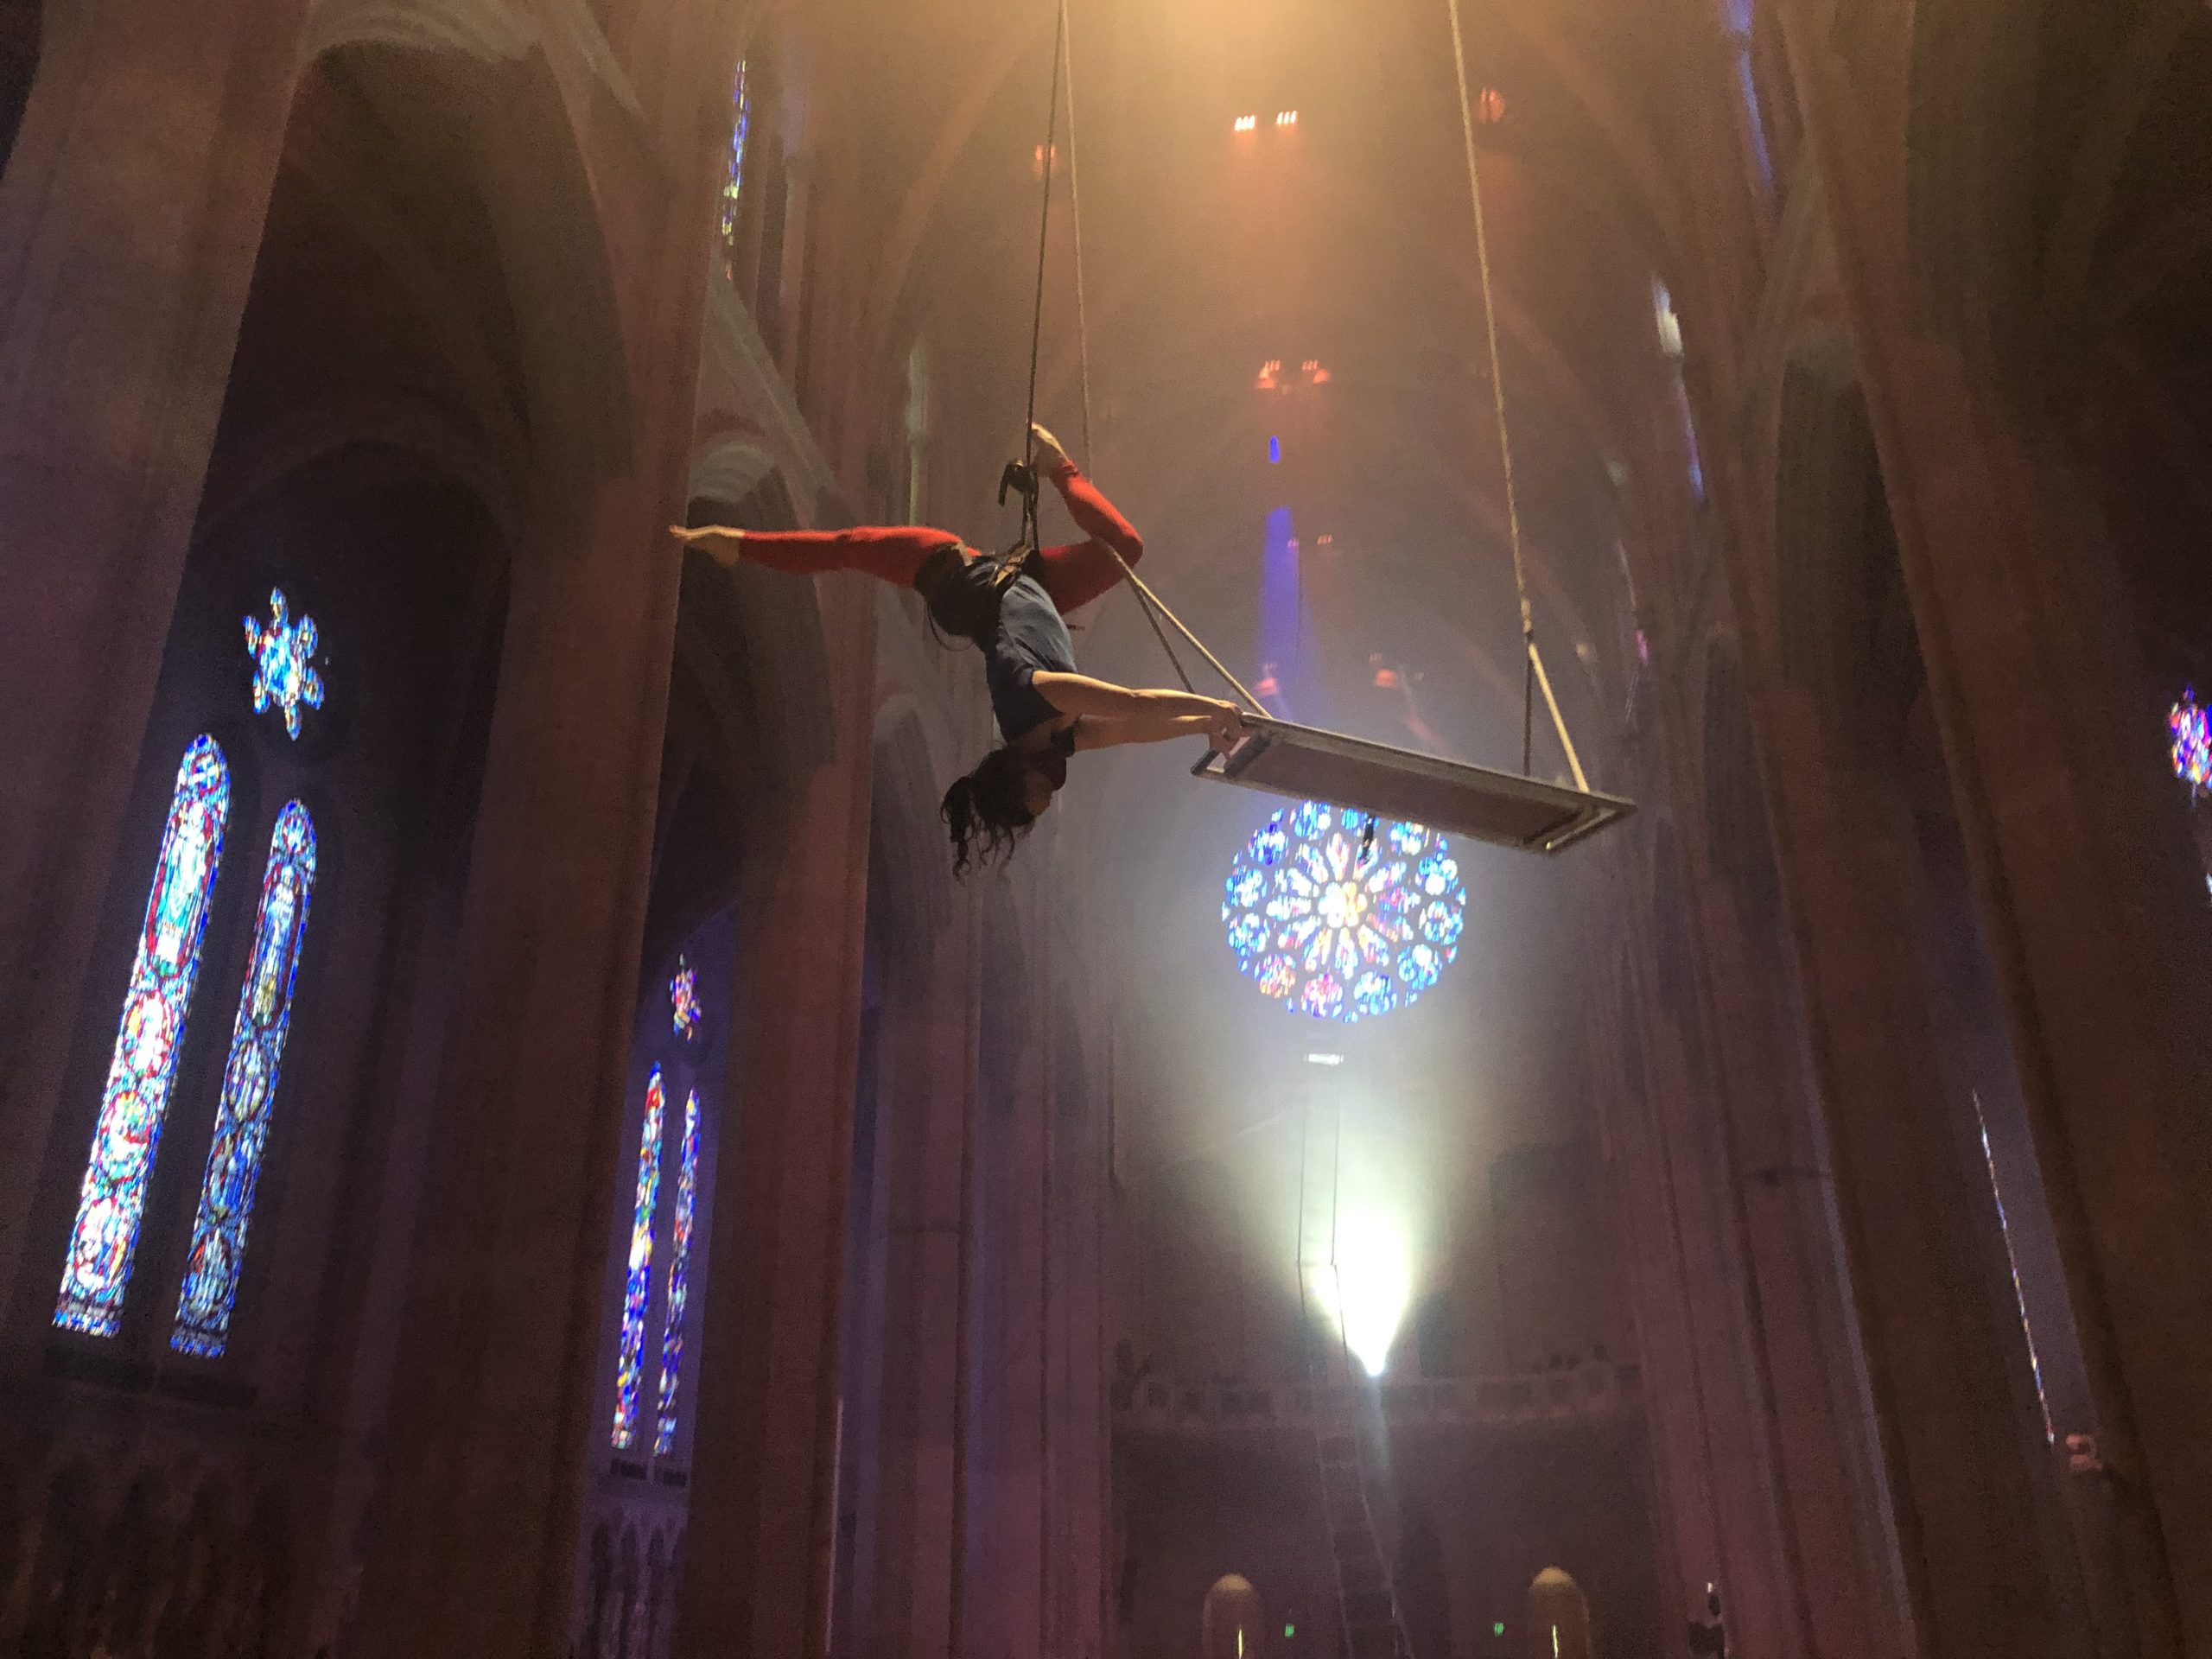 In a soaring cathedral space dotted with stained glass windows, a dancer is suspended, upside down, from the ceiling. She holds a wooden swing with both hands, back slightly arched and knees bent into an upside-down stag leap.